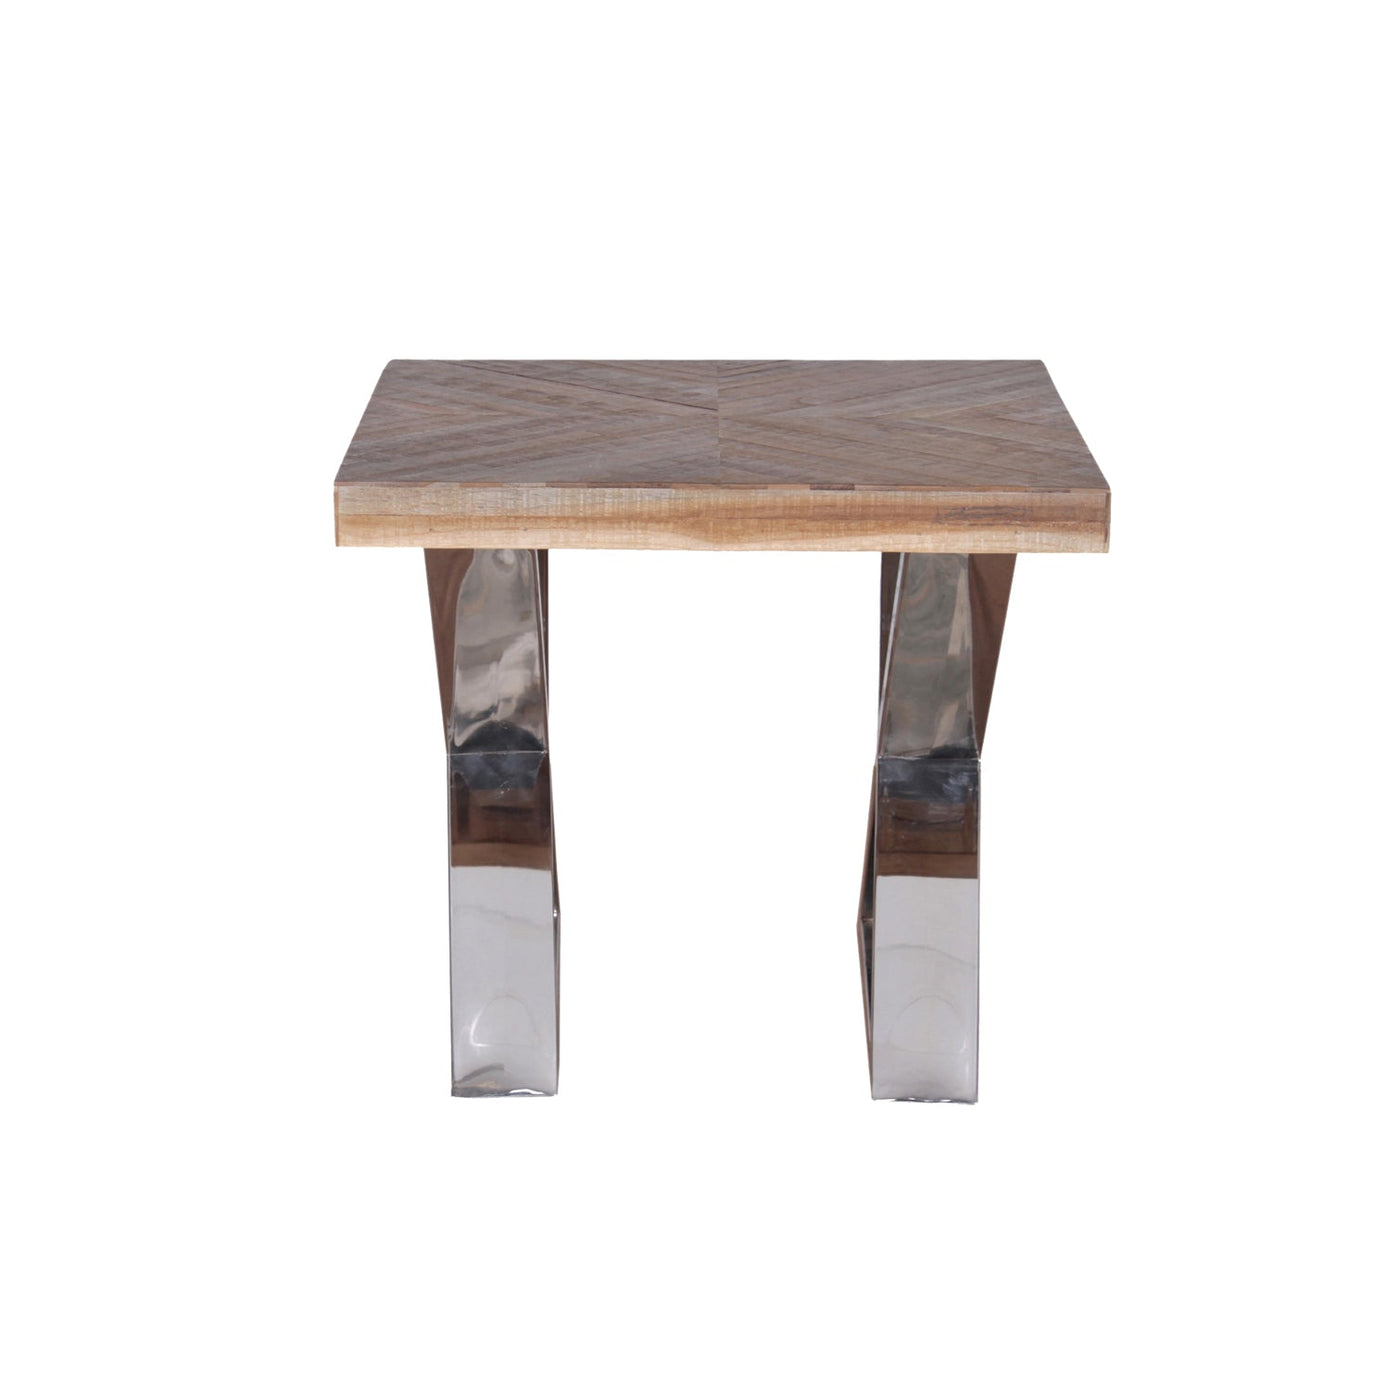 Matrix Side Table in Natural Finish